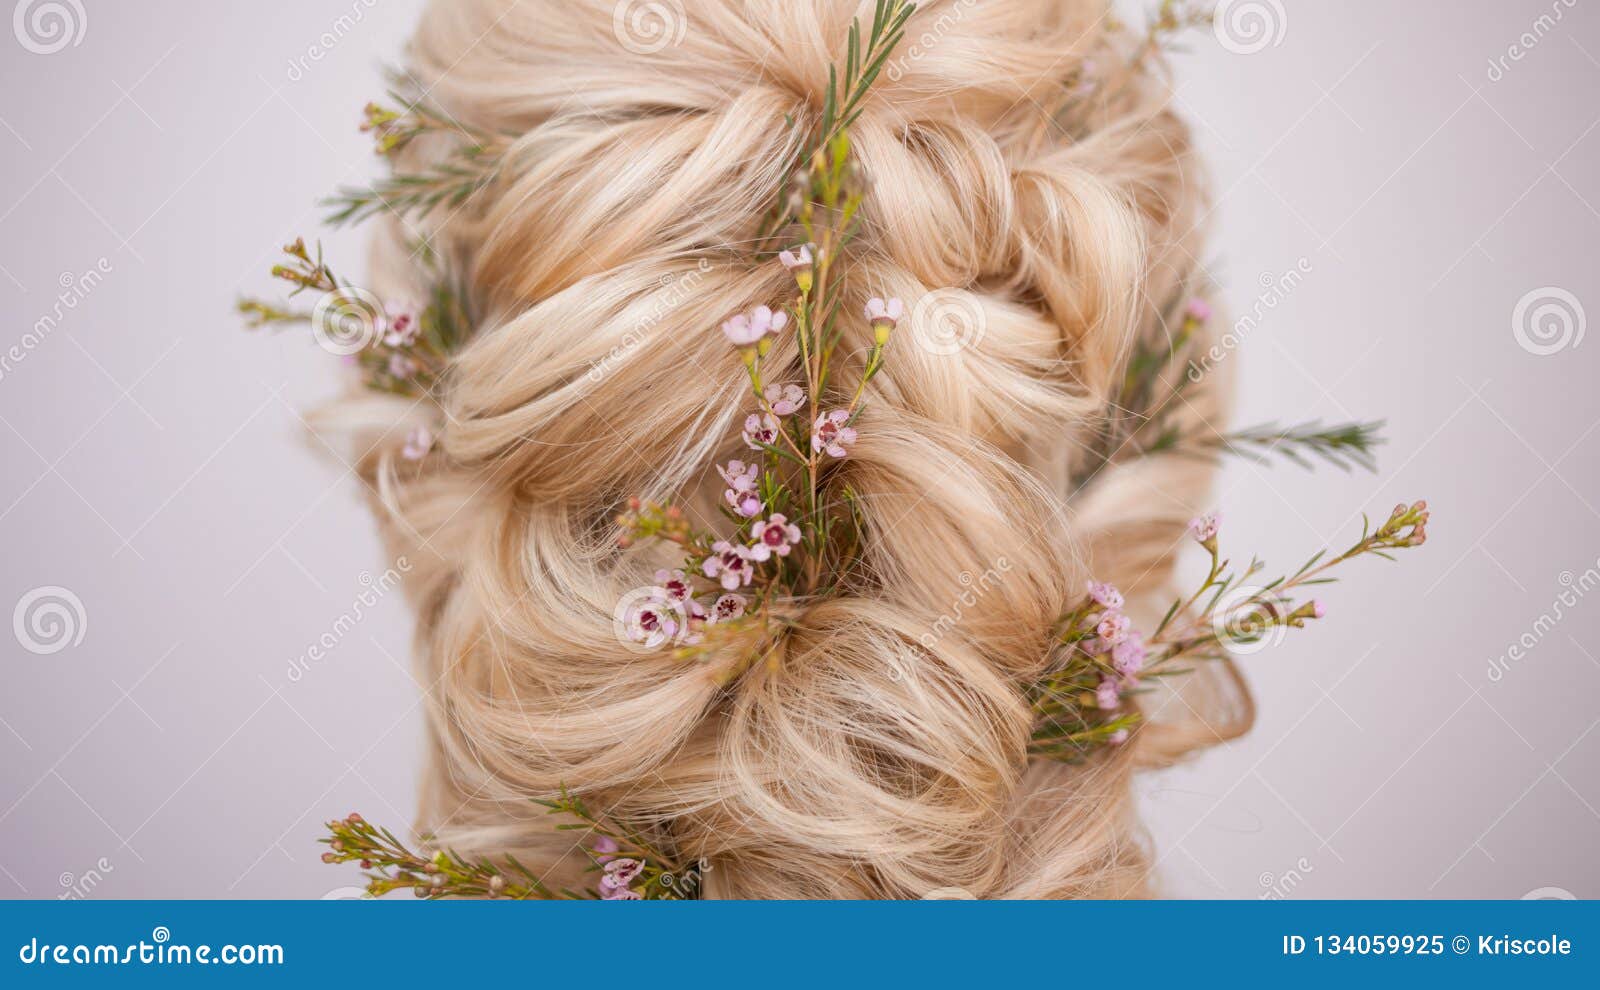 Close-up of Hairstyles with Weaving Strands Decorated with Small Flowers.  Stock Image - Image of fresh, beauty: 134059925